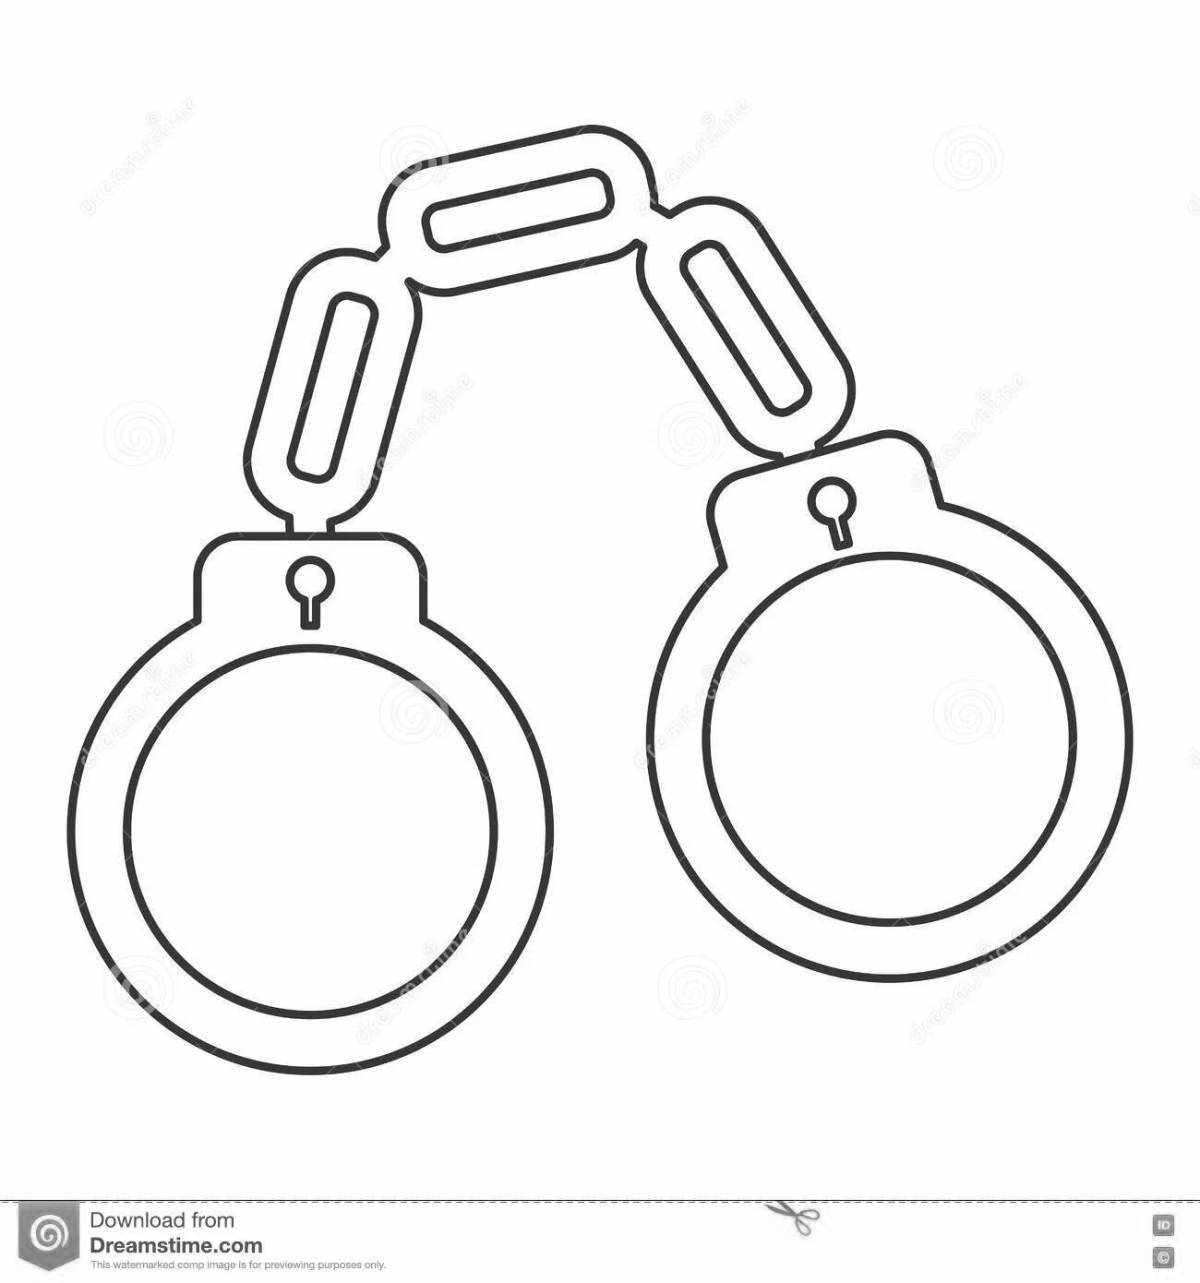 Coloring handcuffs